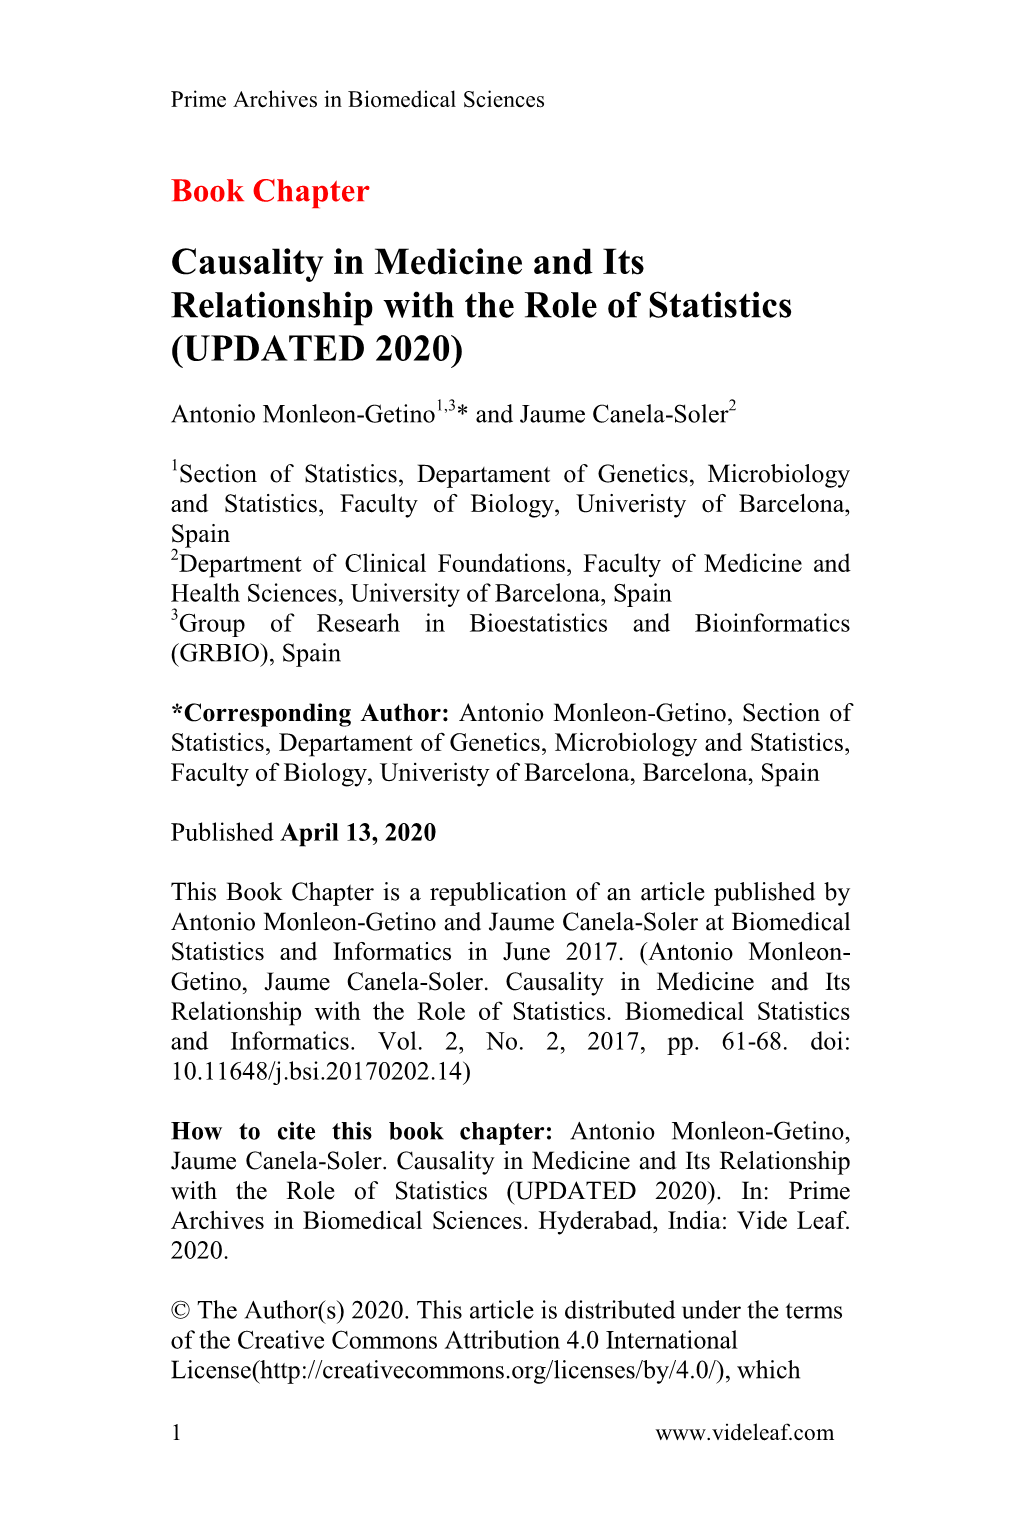 Causality in Medicine and Its Relationship with the Role of Statistics (UPDATED 2020)